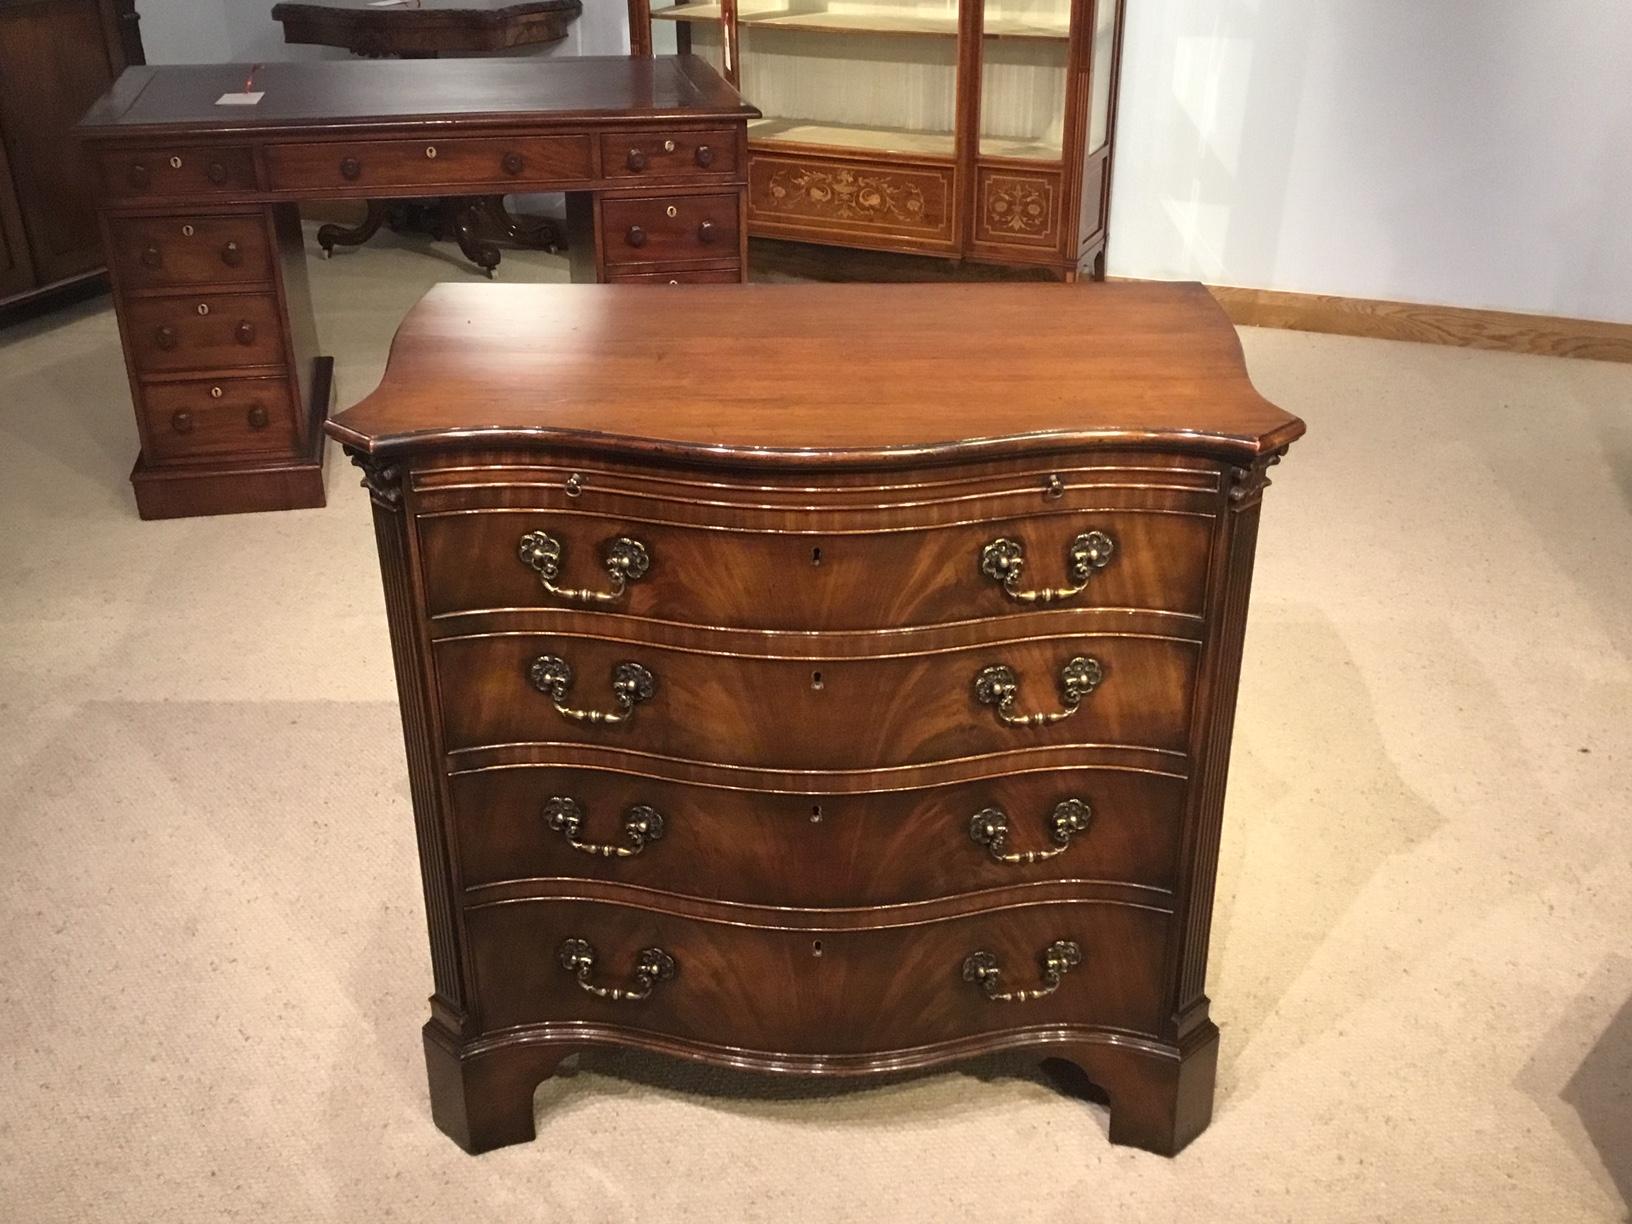 Chippendale Revival Flame Mahogany Serpentine Bachelors Chest (Edwardian)